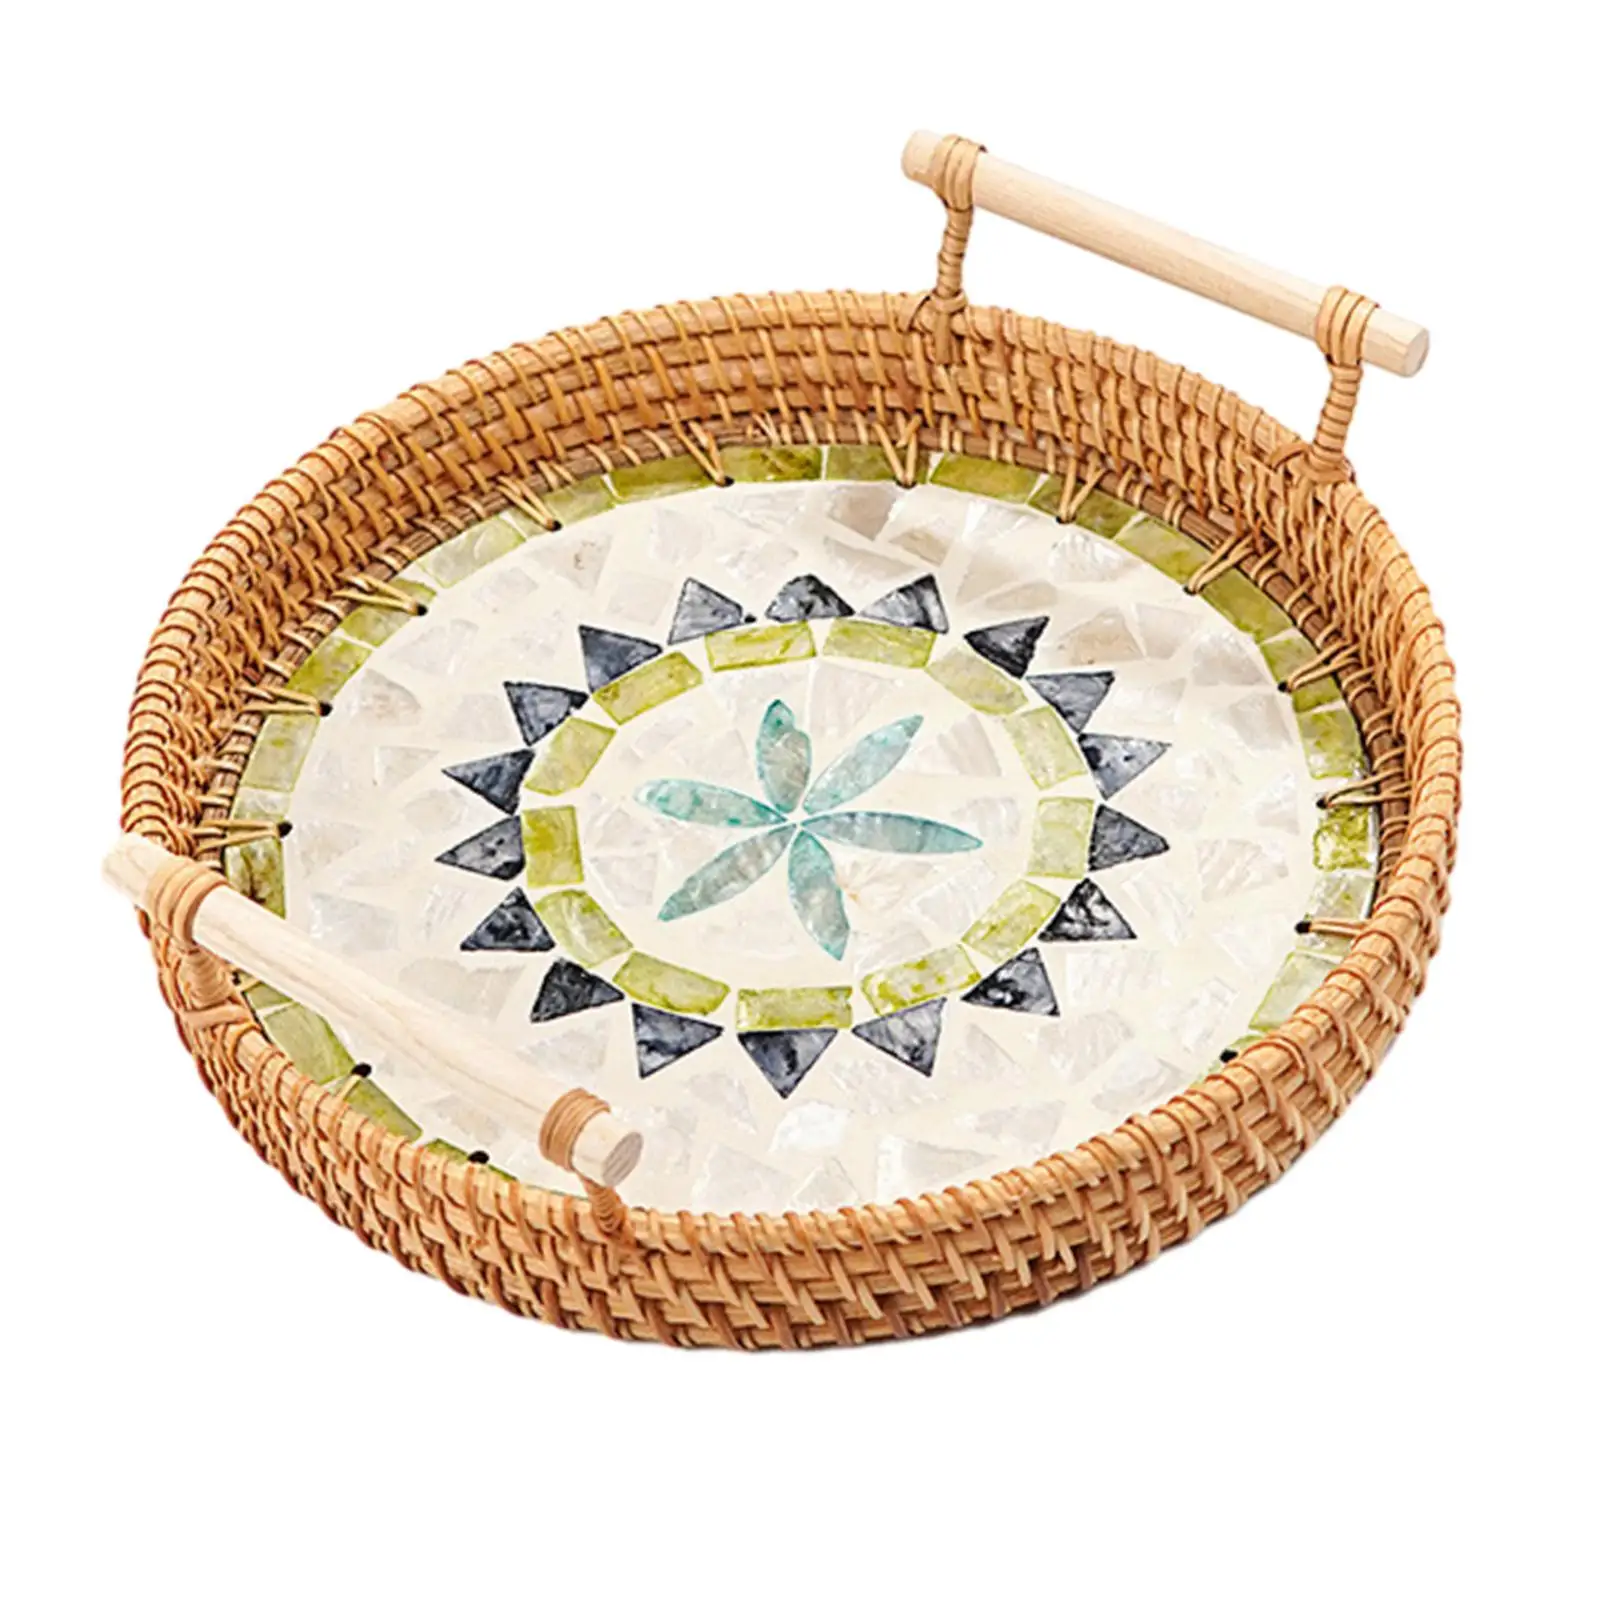 Woven Rattan Serving Tray Bread Nordic Multifunctional Cake Snacks Tray for Kitchen Coffee Table Afternoon Tea Party Living Room